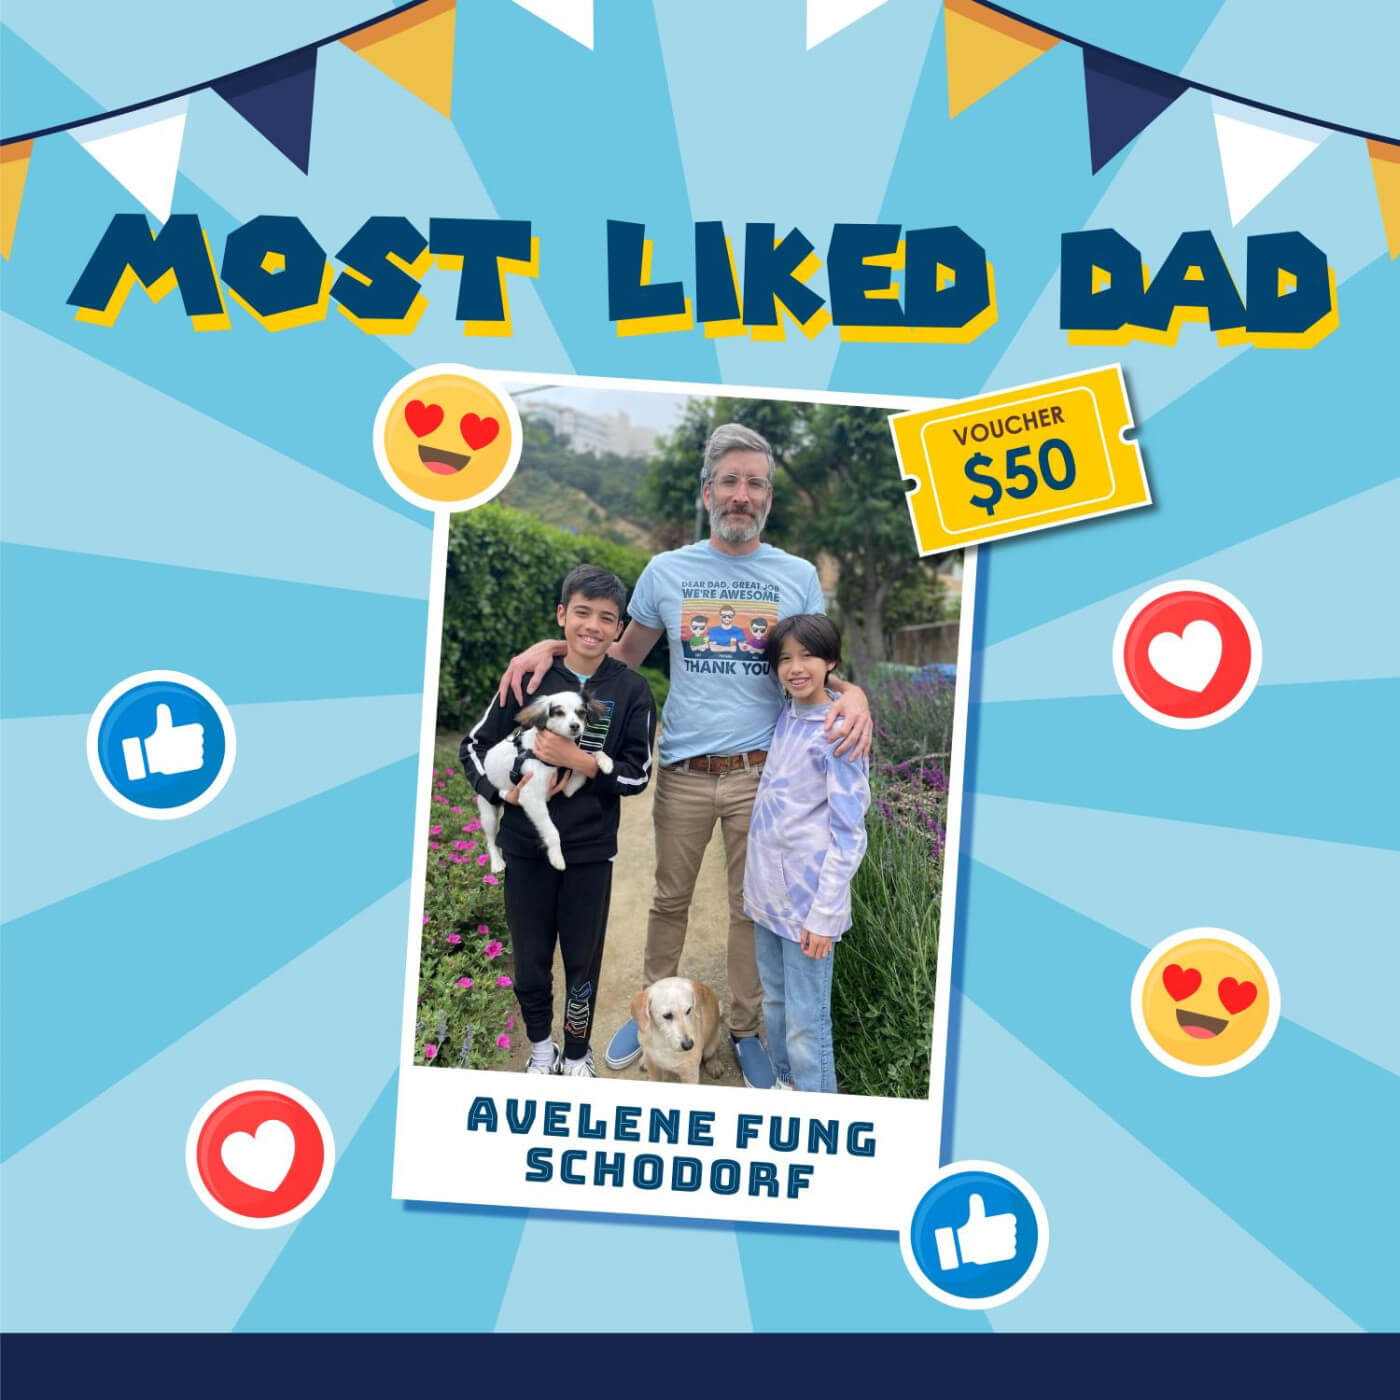 Most Liked Dad Contest